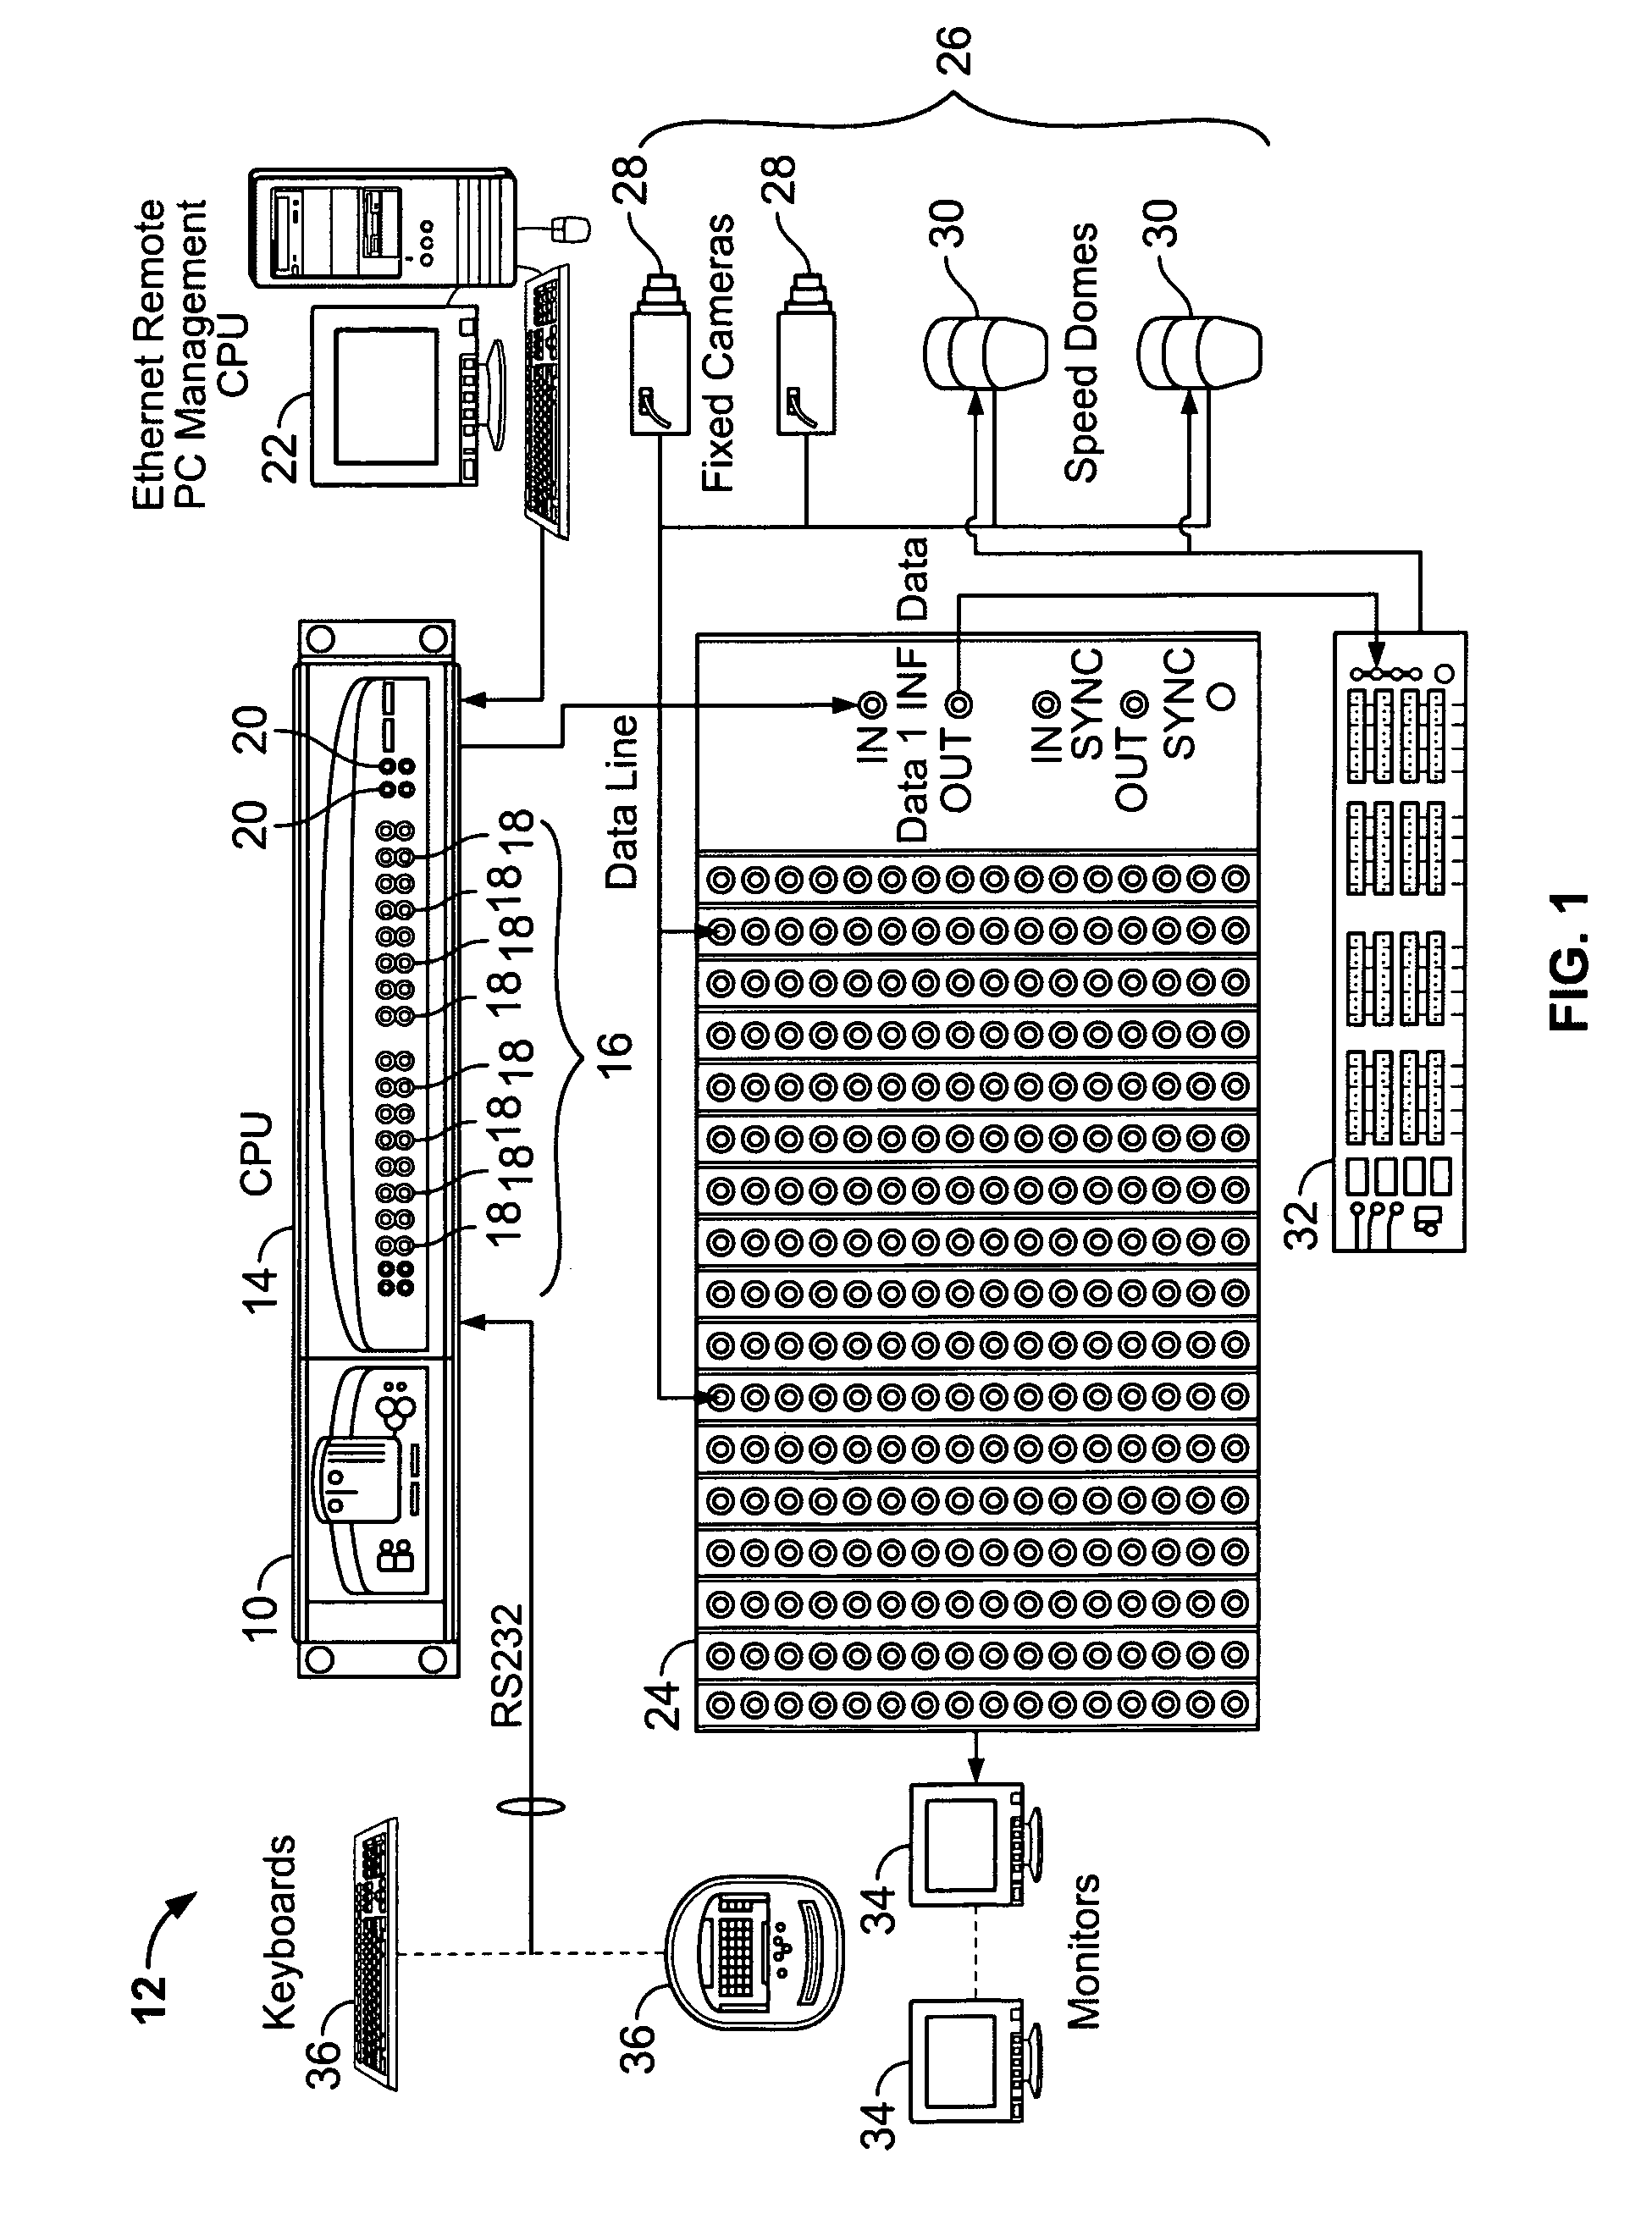 Controller for a video matrix switching system